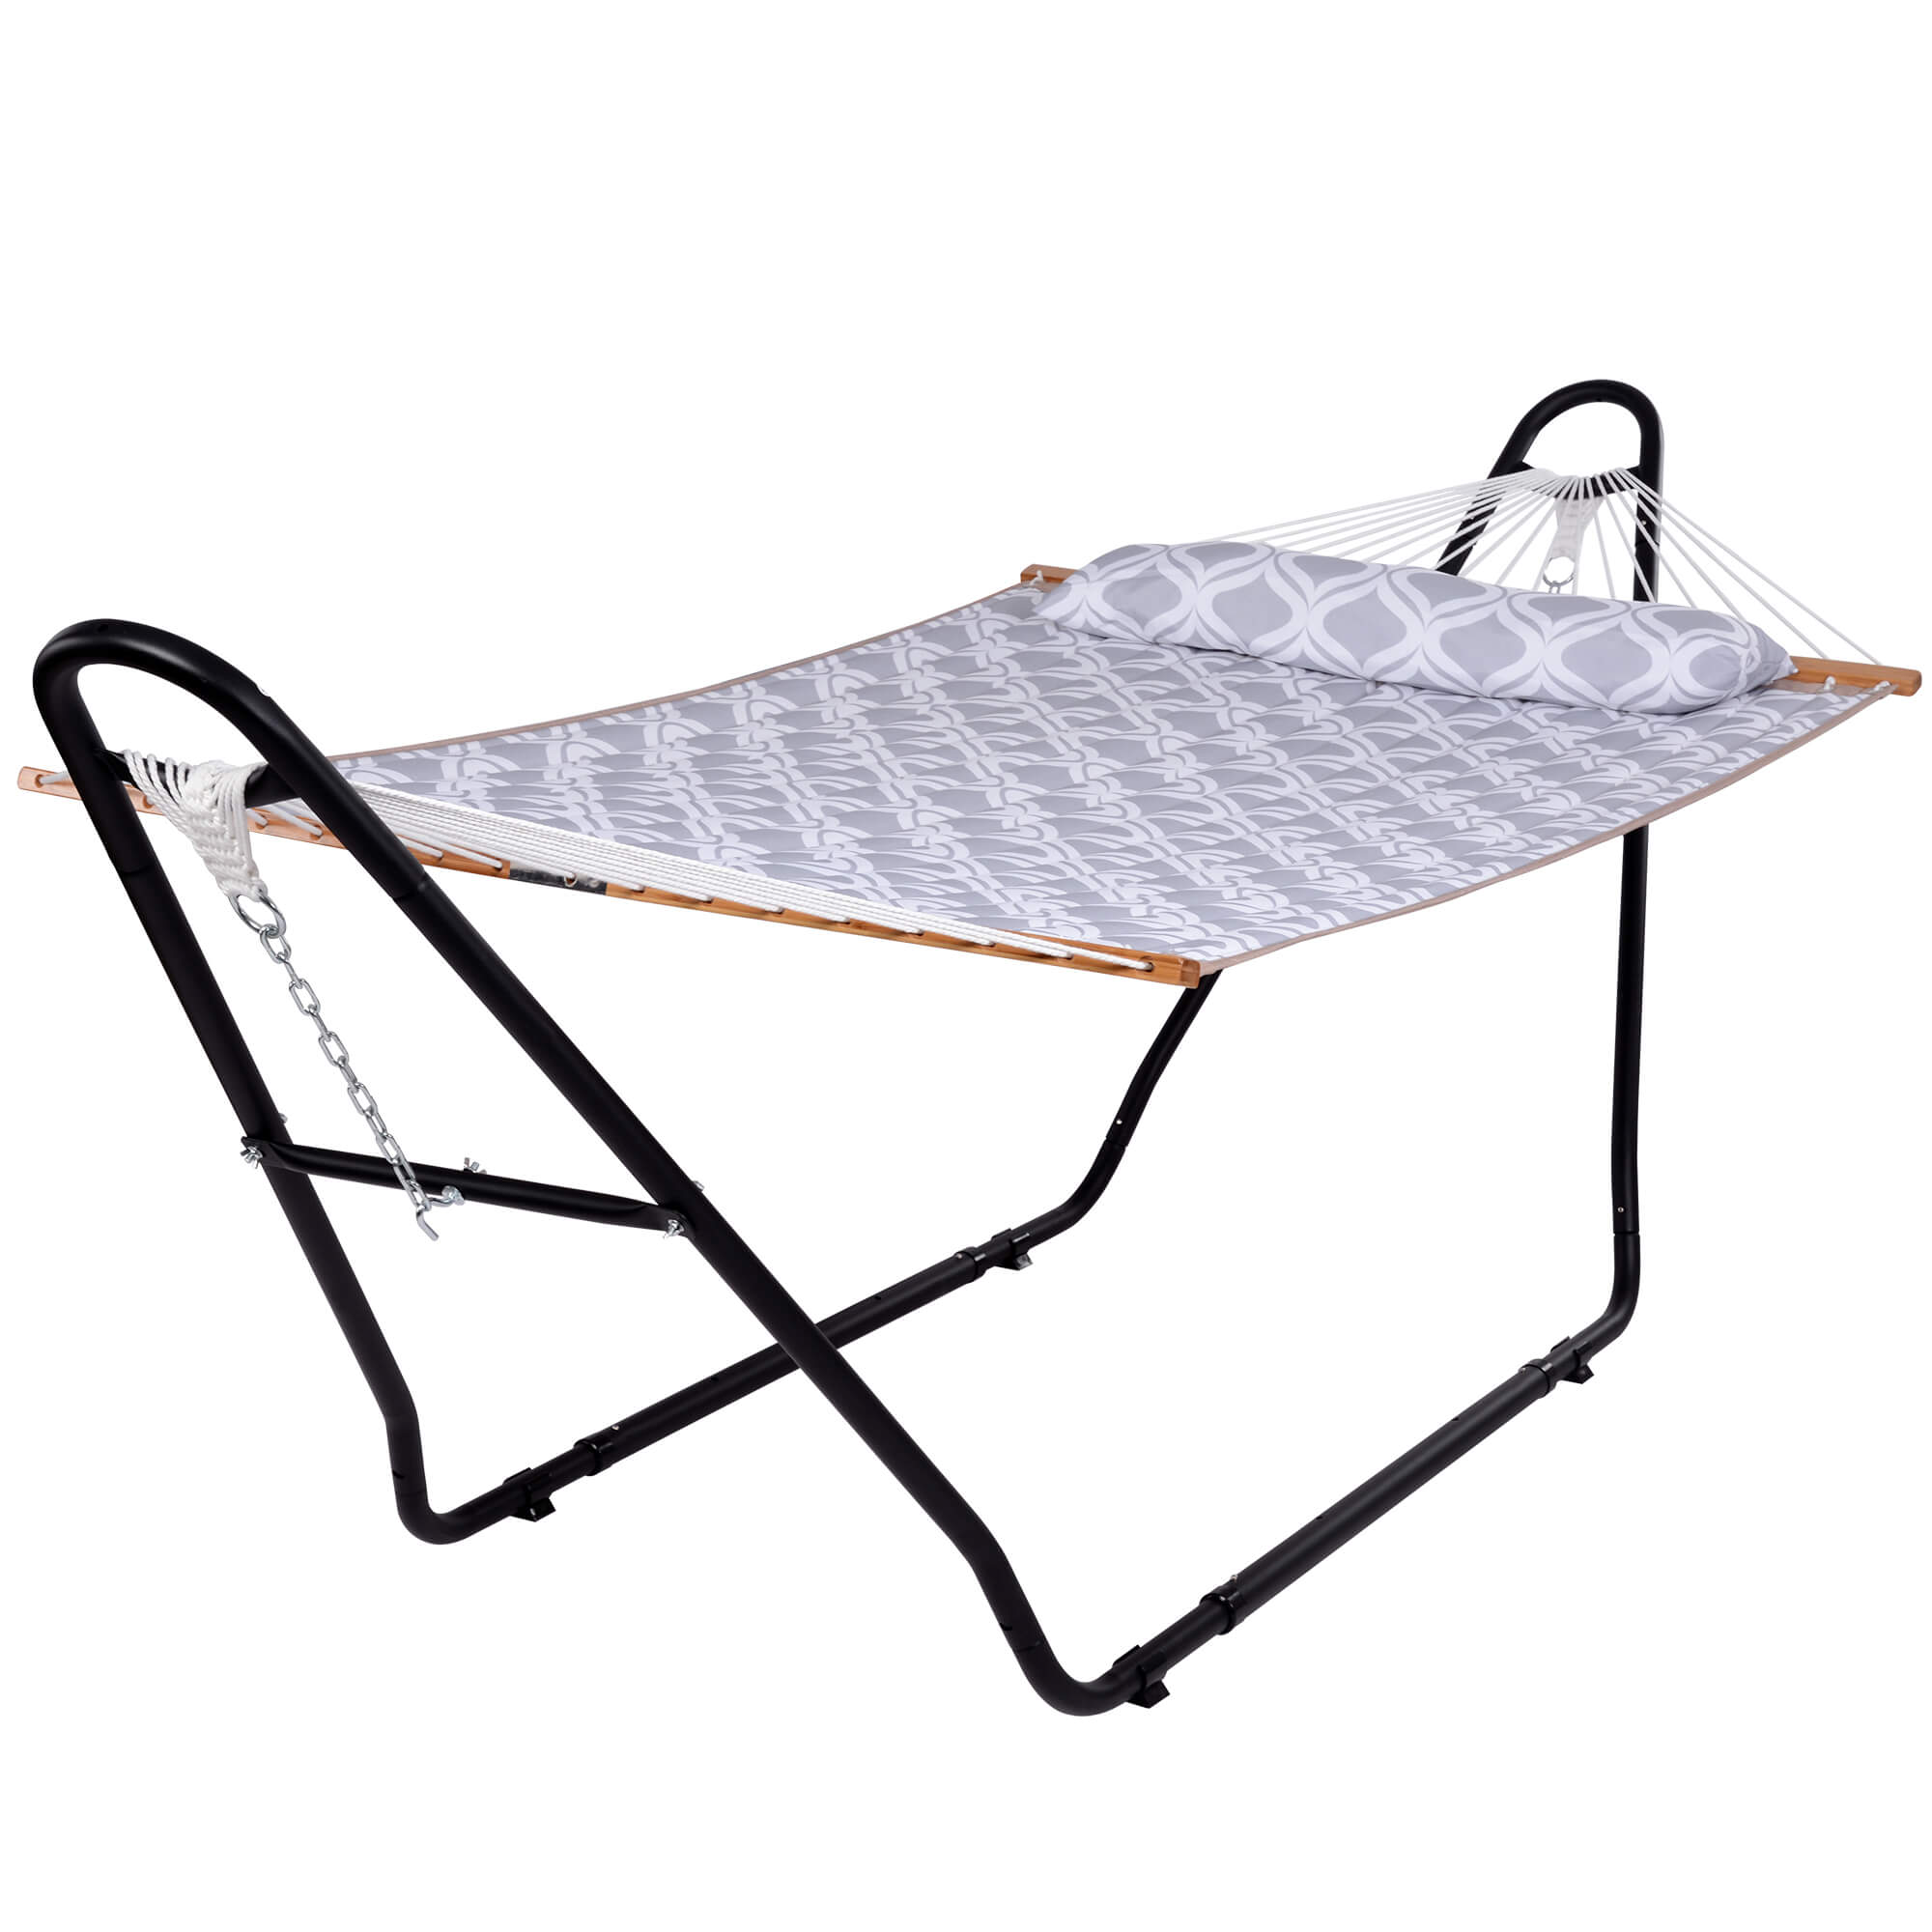 SUNCREAT-2-in-1 Portable-Double-Hammock-with-Stand-for-Outdoor-Gray#color_gray